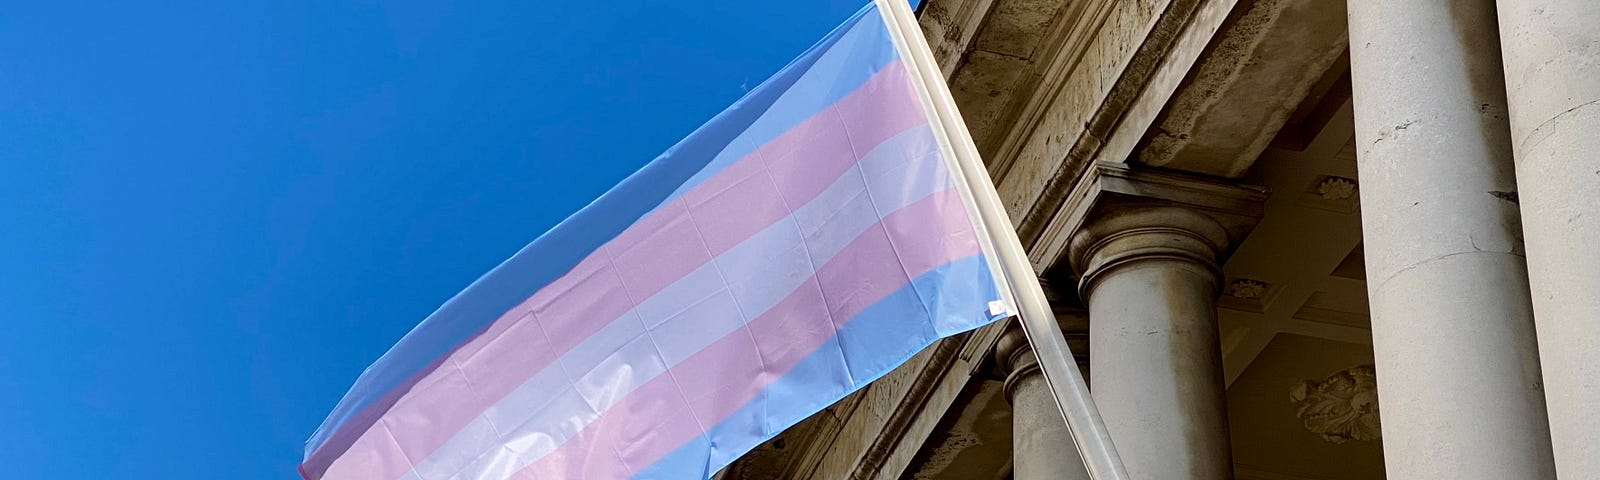 a trans flag fluttering in the sunshine at greenwhich uk